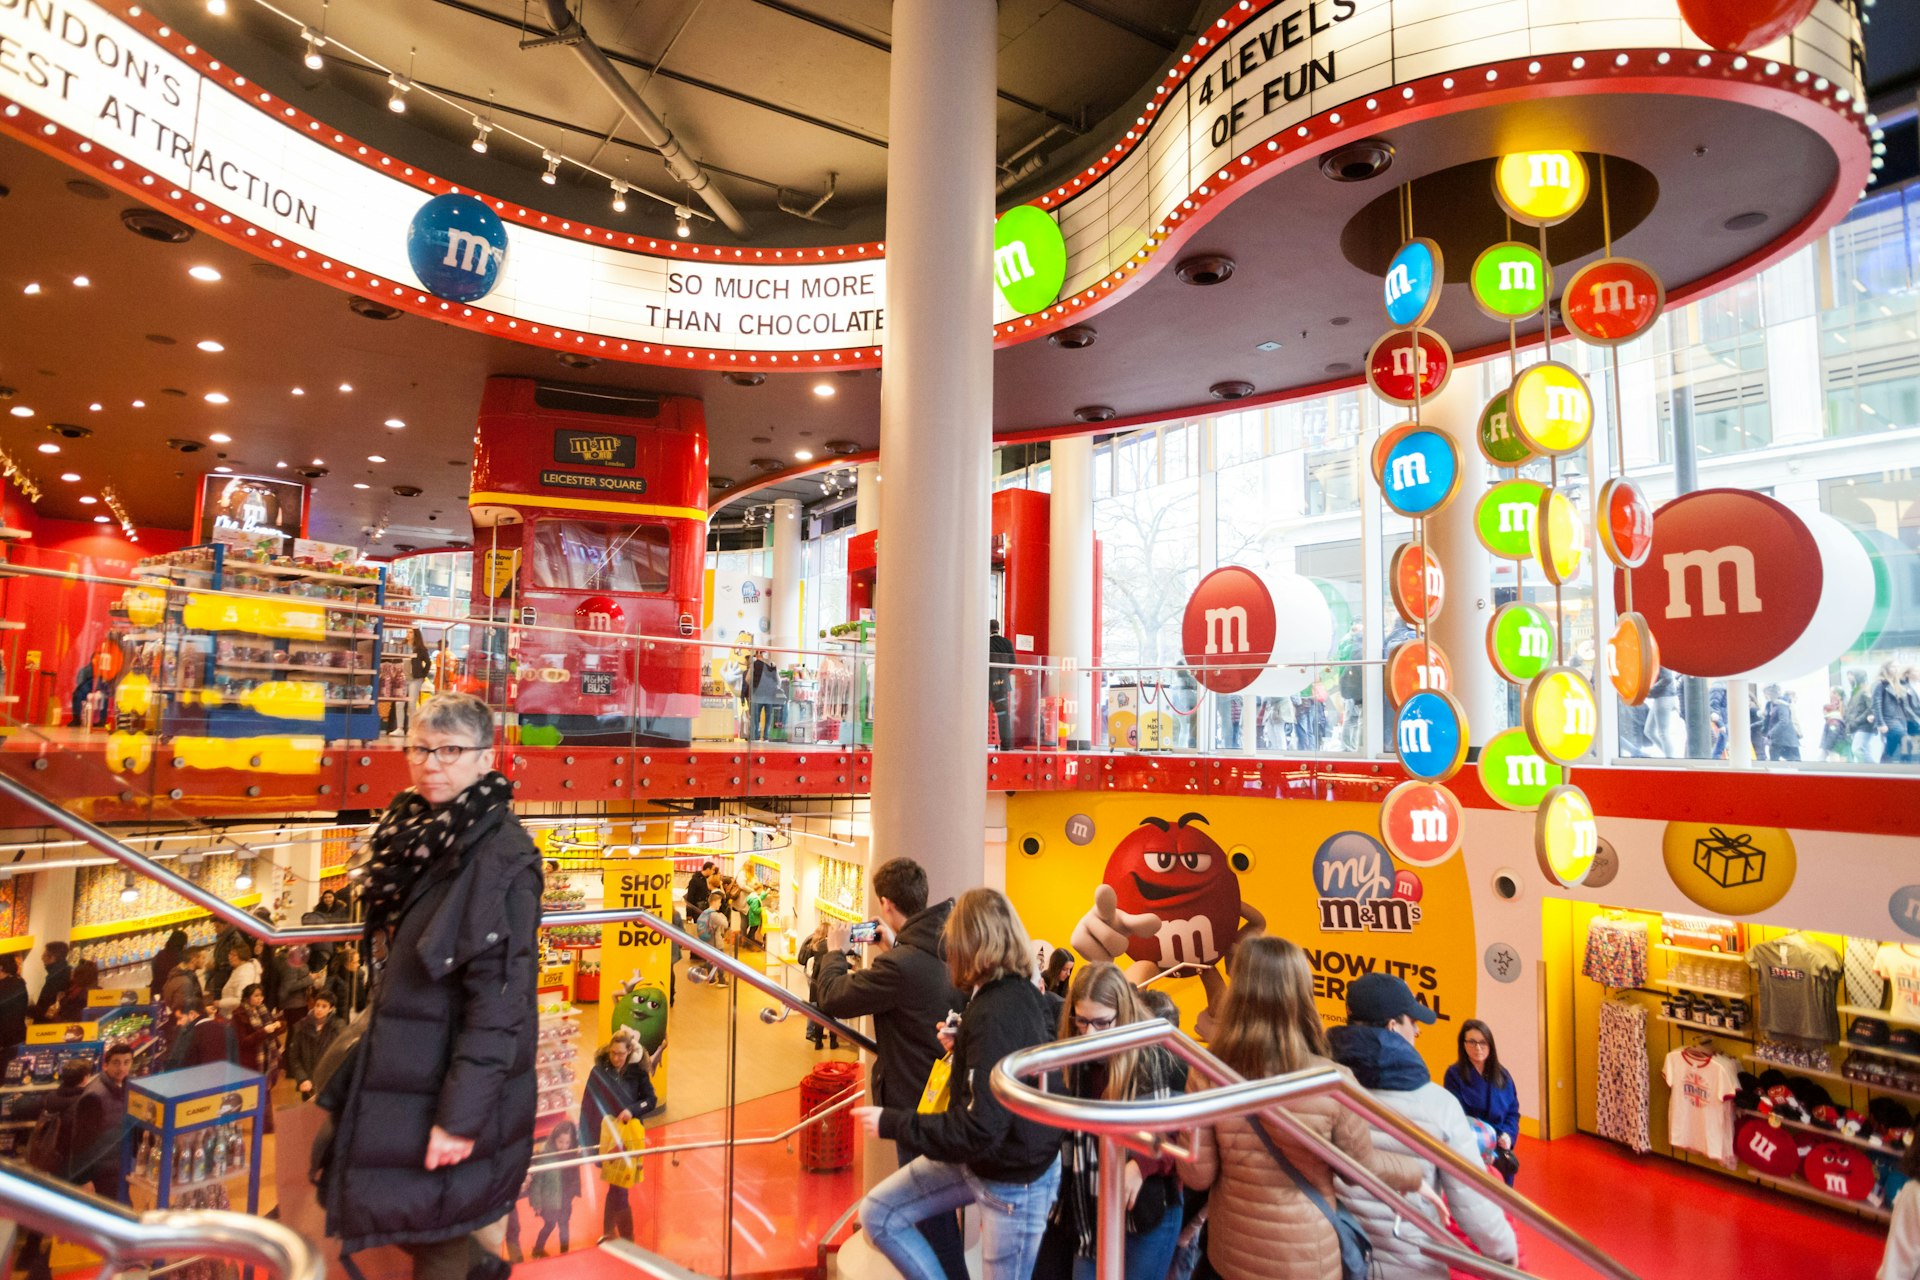 Shoppers at the M&M’s London store, London, England, United Kingdom